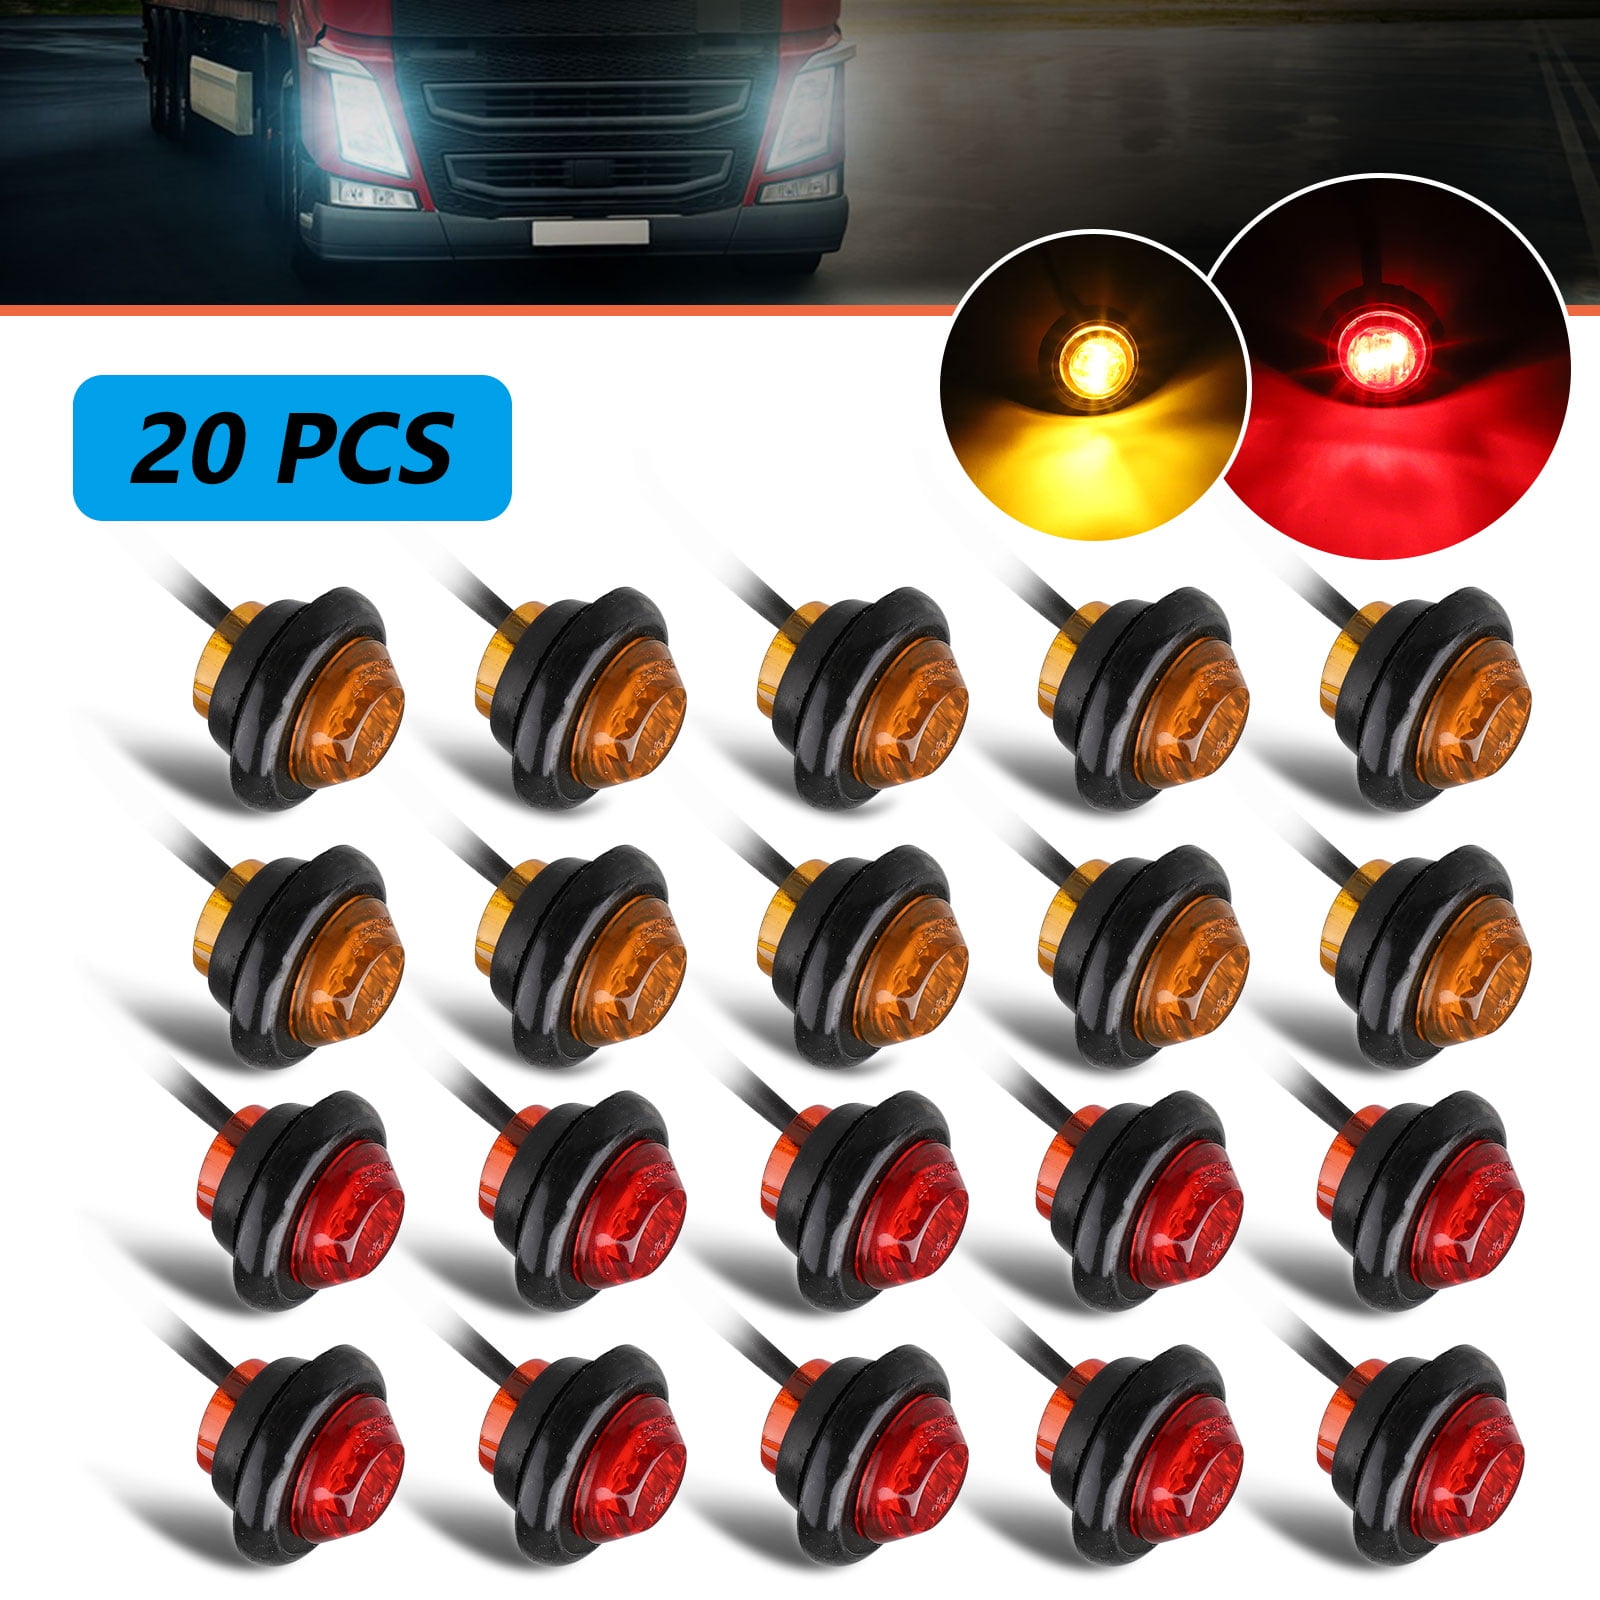 Surface mounts on 3 centers Red rectangular led lights 10 Pcs 4 Sealed Thin Line LED Trailer Clearance Side Marker Lights 4 Diodes Red 